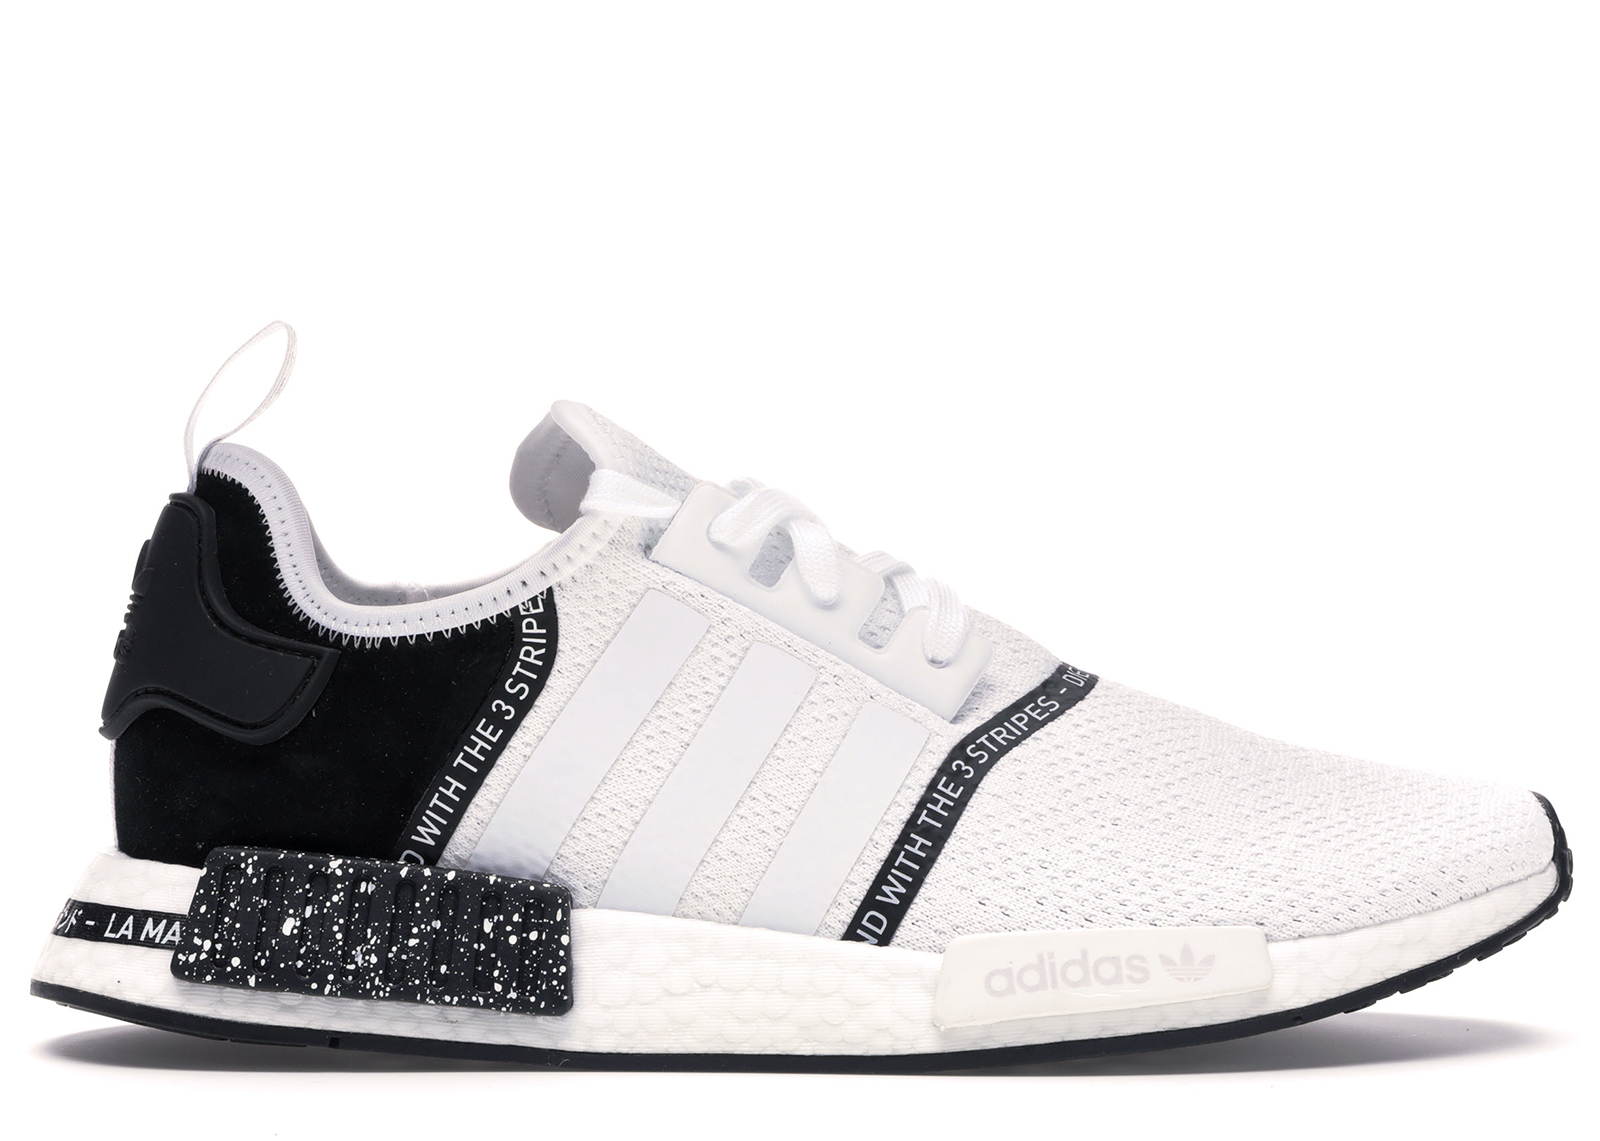 adidas NMD R1 Speckle Pack White - EF3326